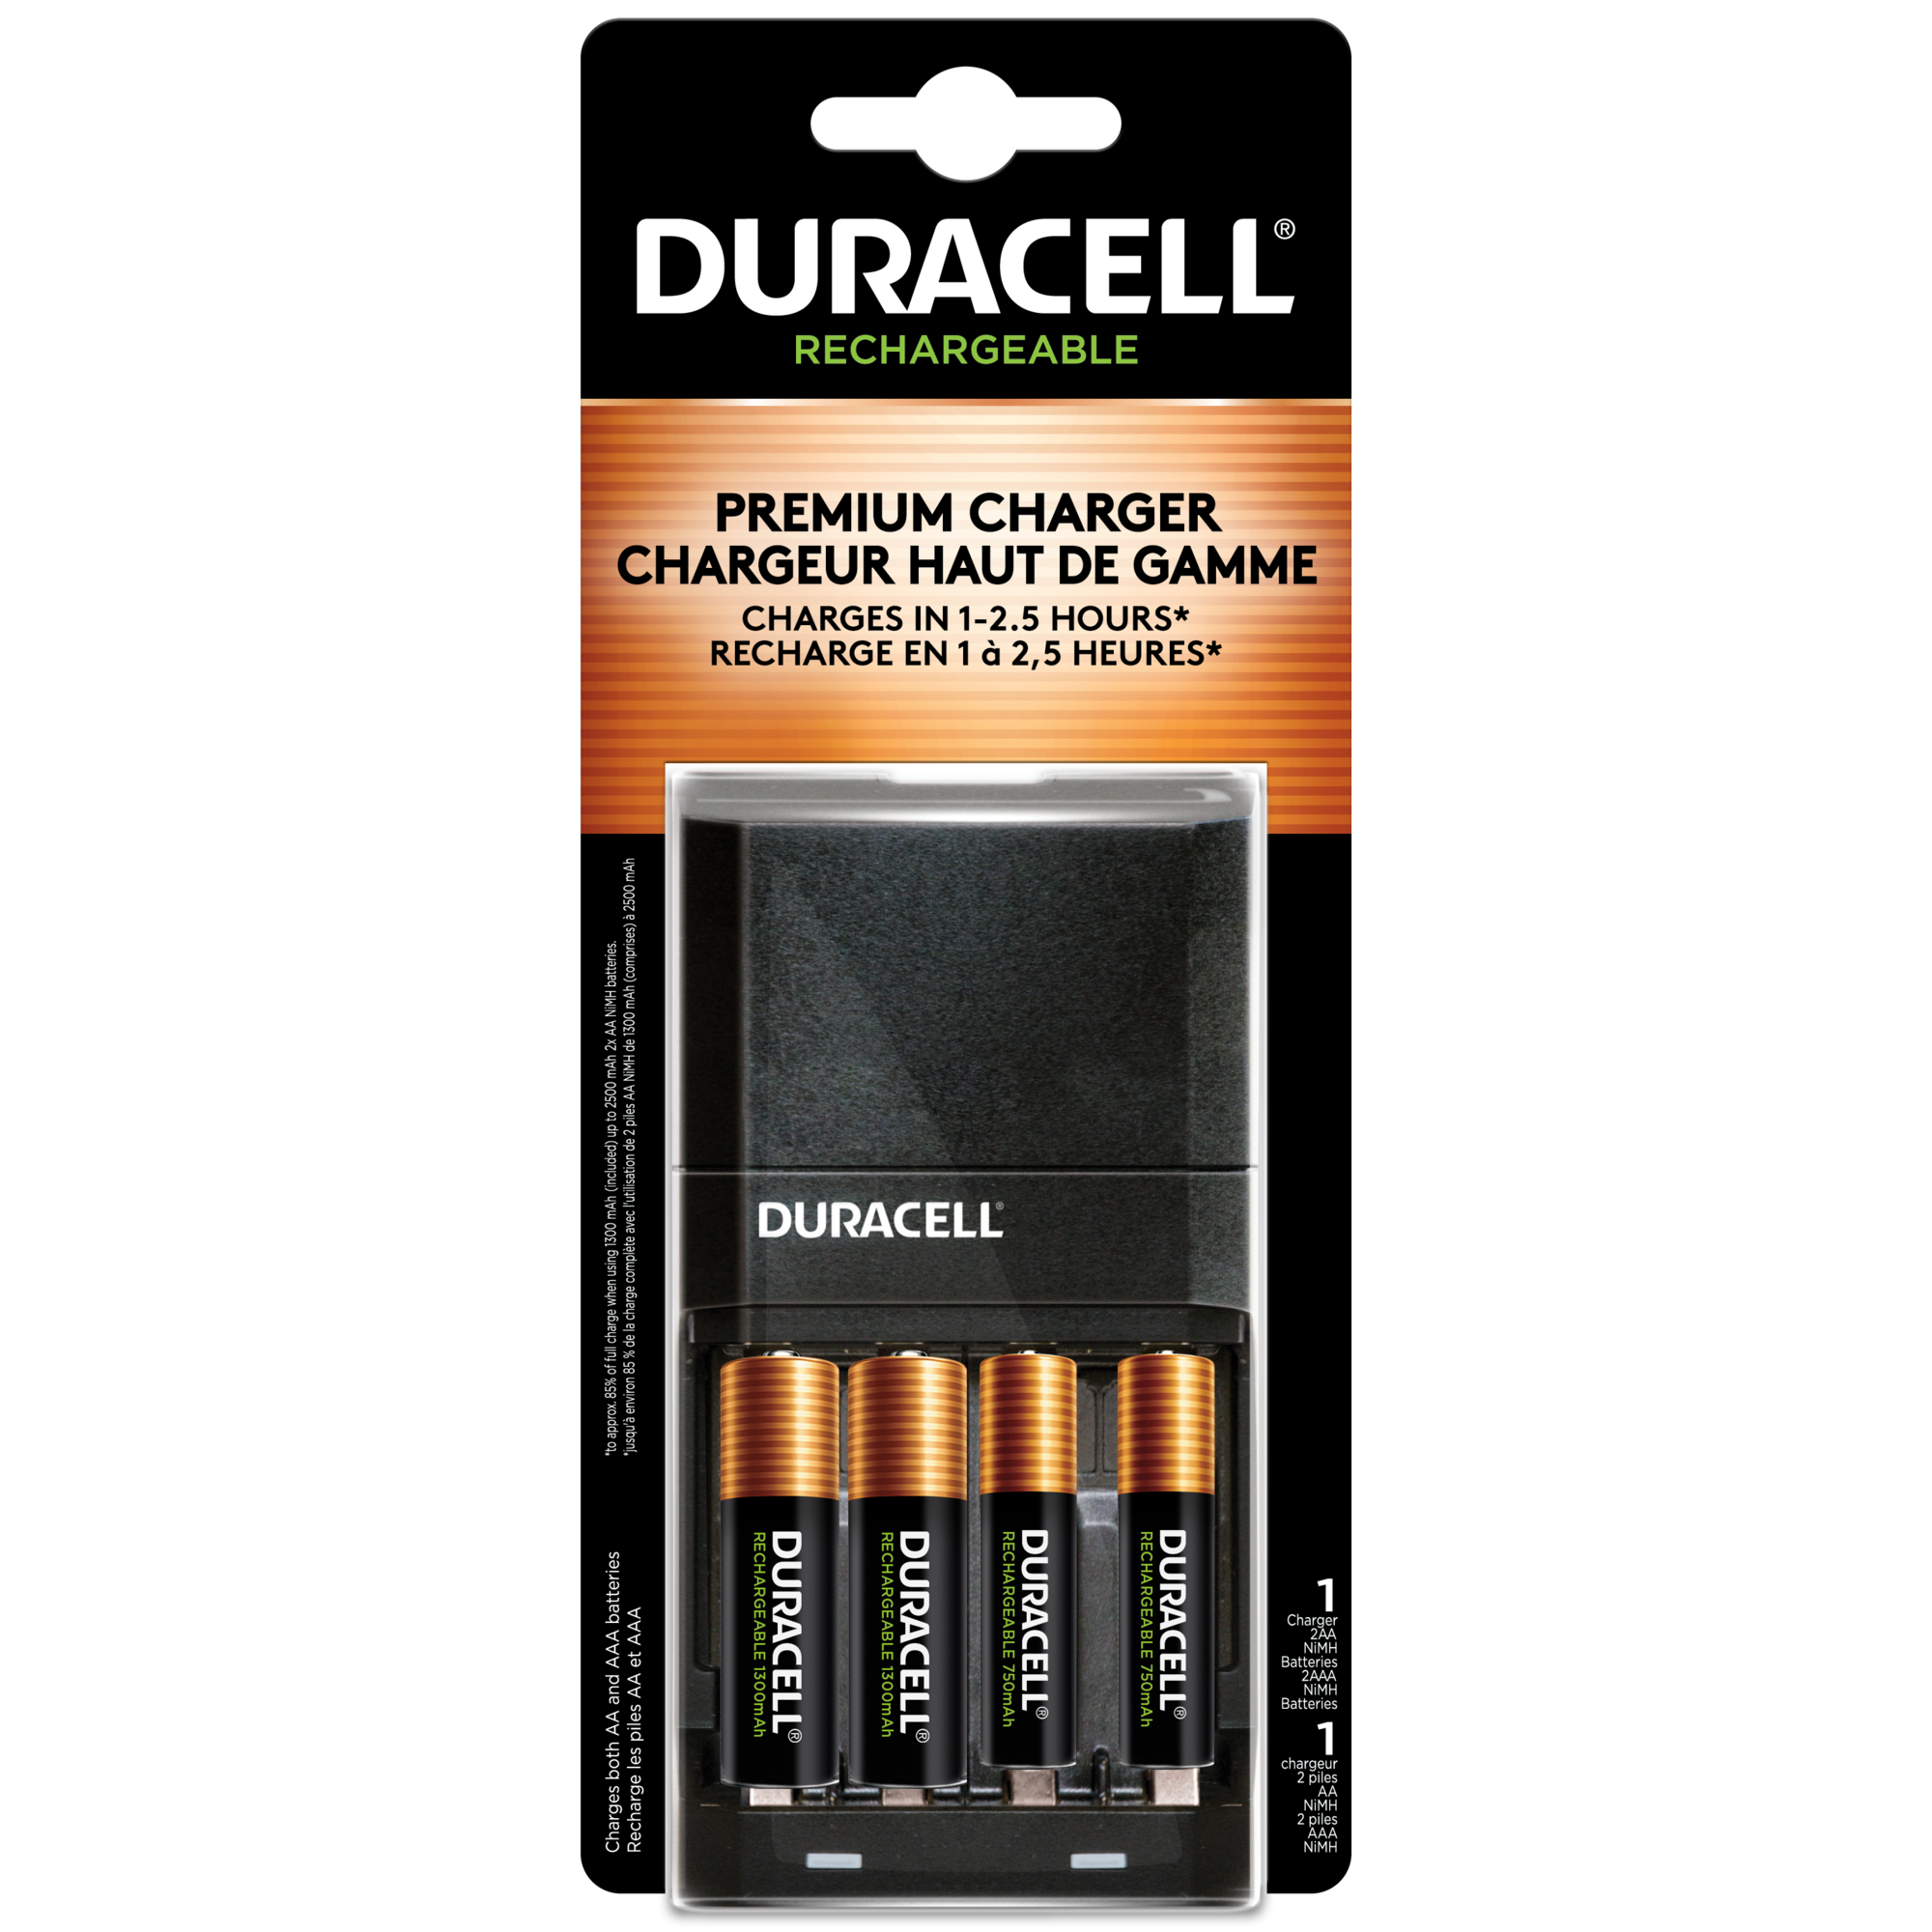 Duracell Duracell ion speed 4000 battery charger Rechargeable